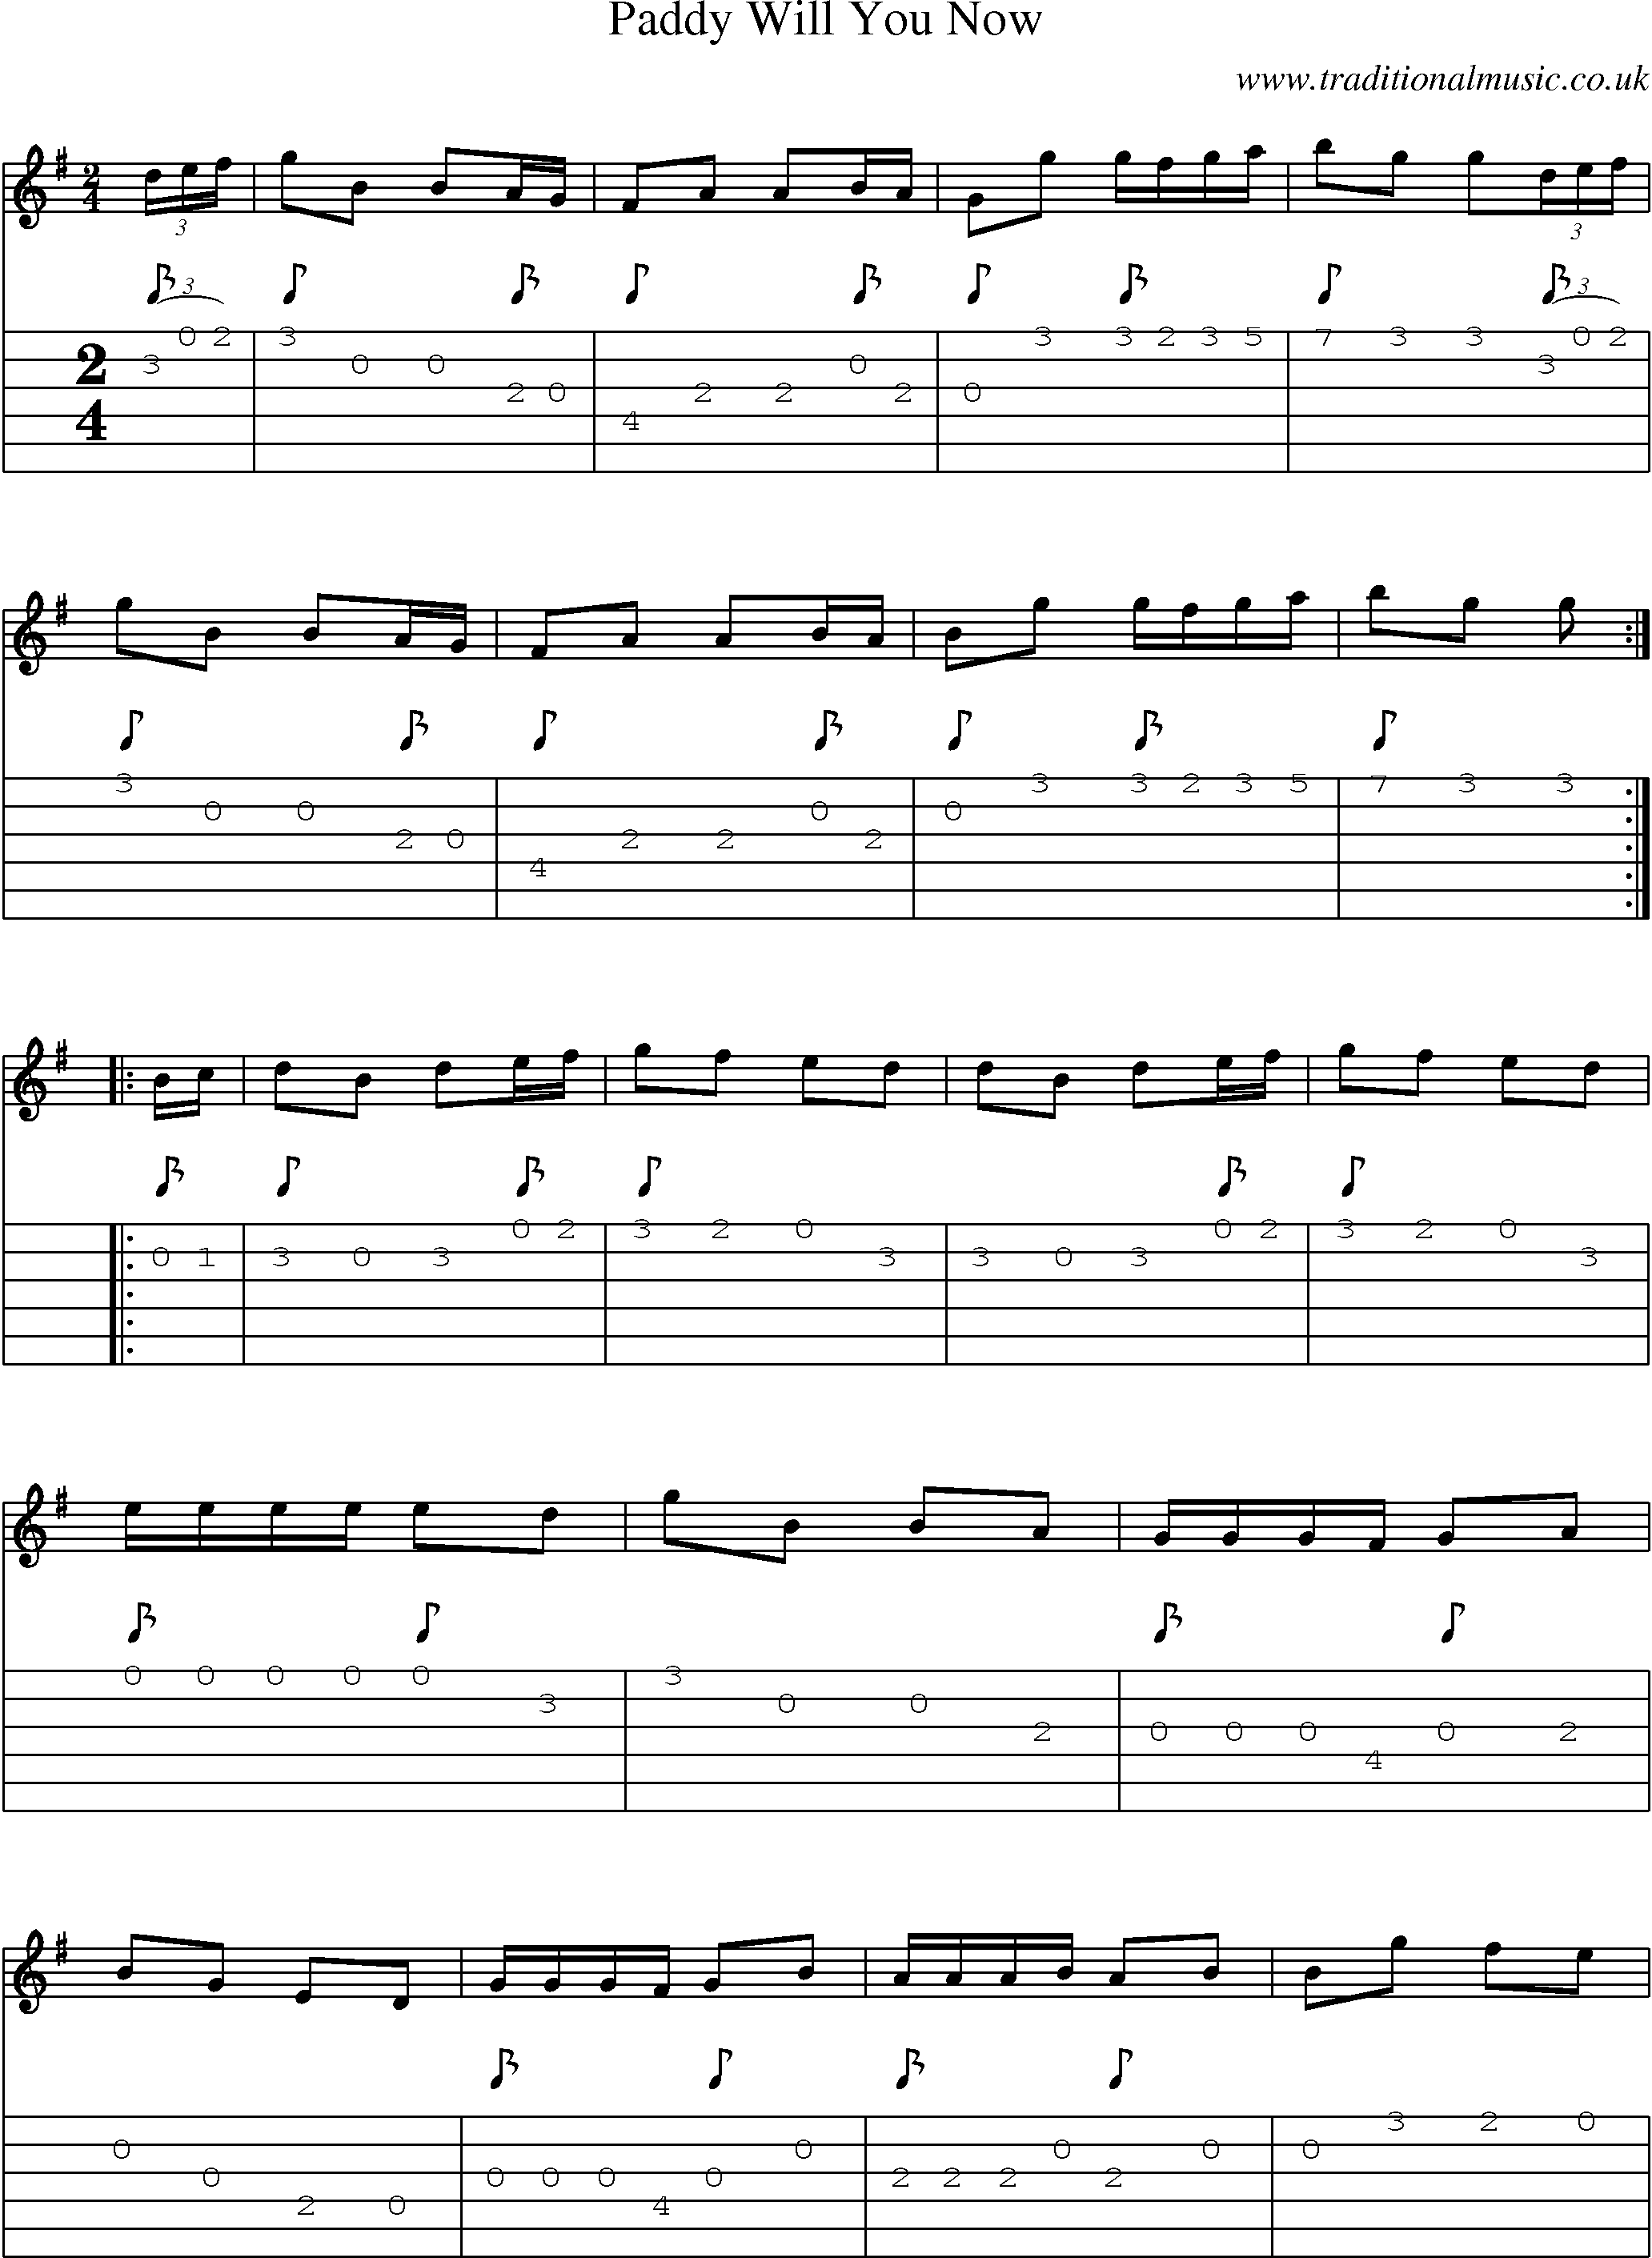 Music Score and Guitar Tabs for Paddy Will You Now